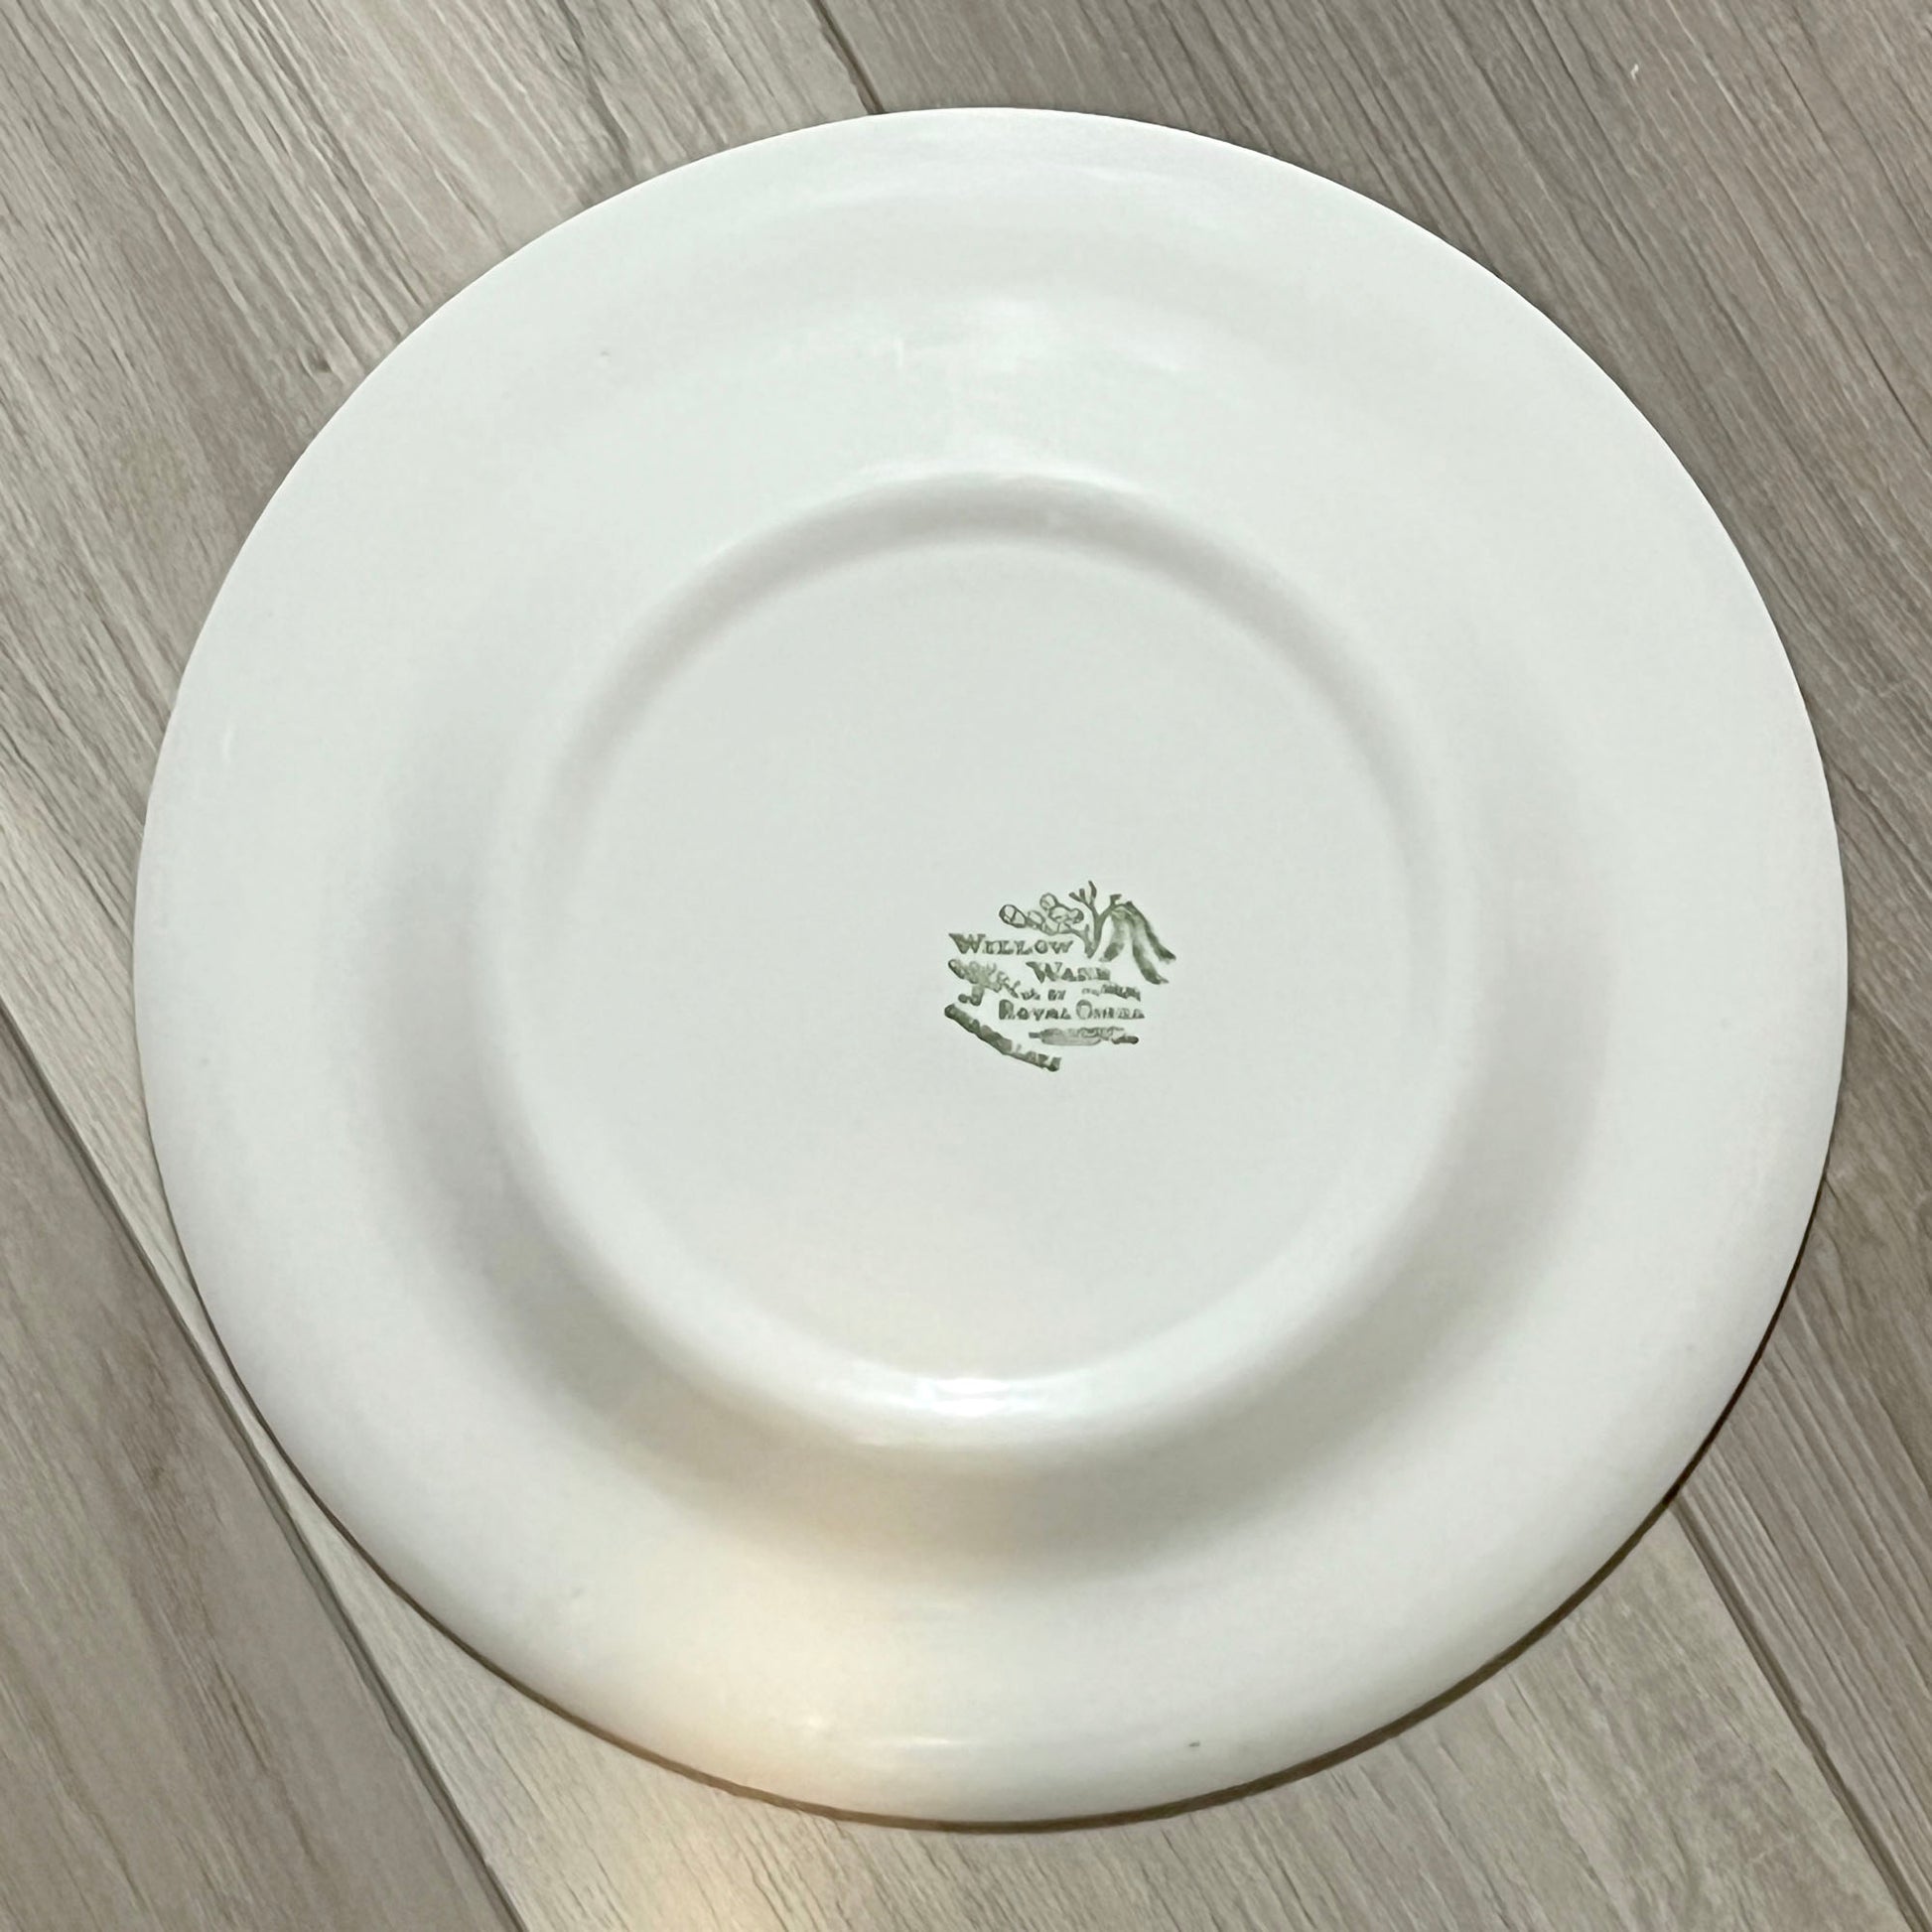 Back of plate showing Willow Ware by Royal China logo.